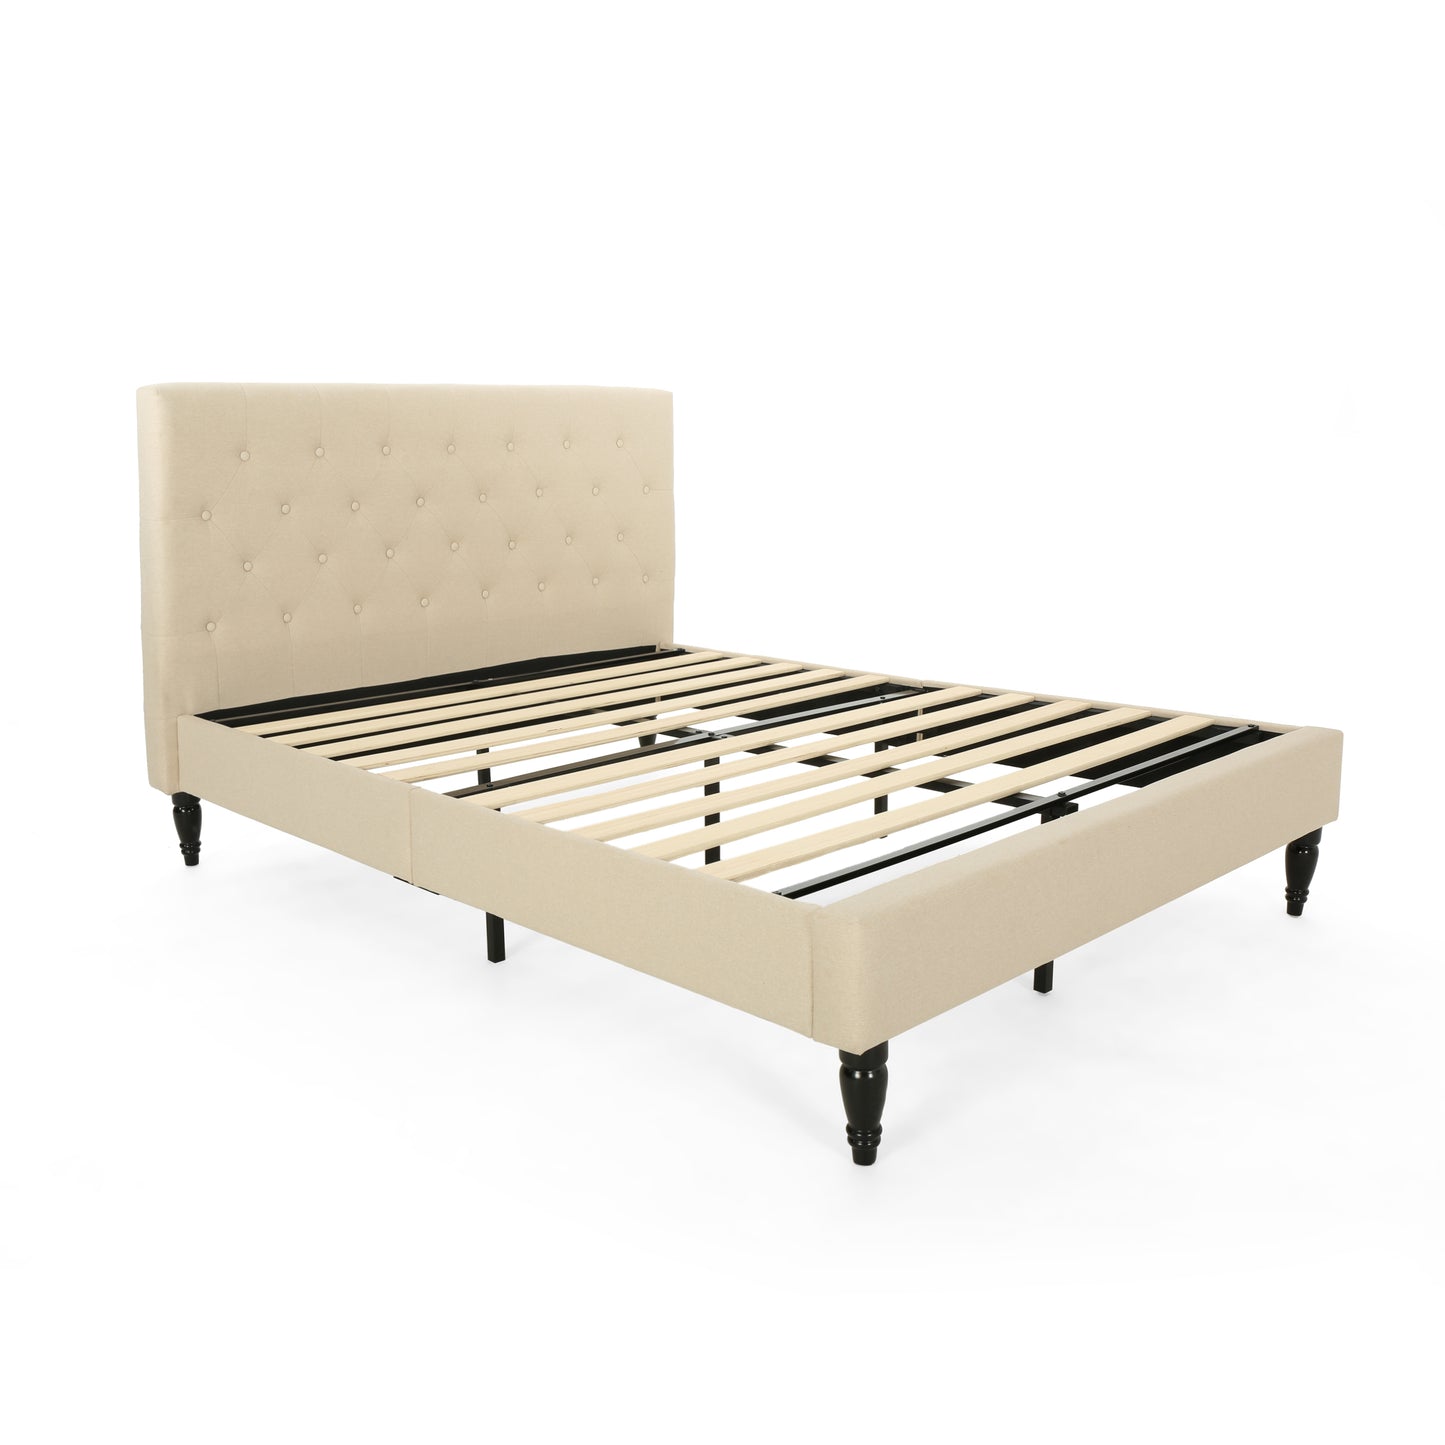 Lera Fully-Upholstered Queen-Size Platform Bed Frame, Low-Profile, Contemporary